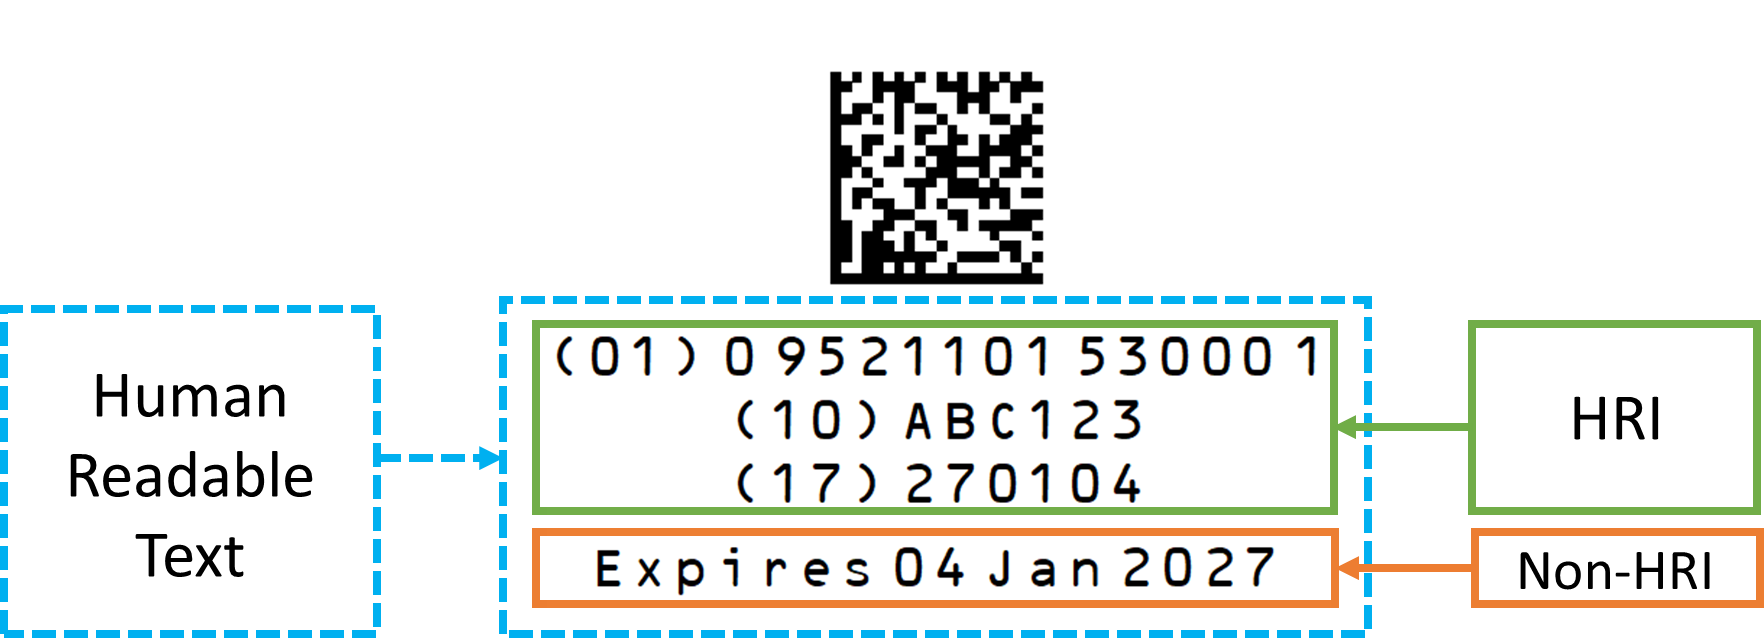 Image shows the GTIN, batch and expiry date as element strings with brackets. These are HRI. The interpreted expiry date is not classed as HRI